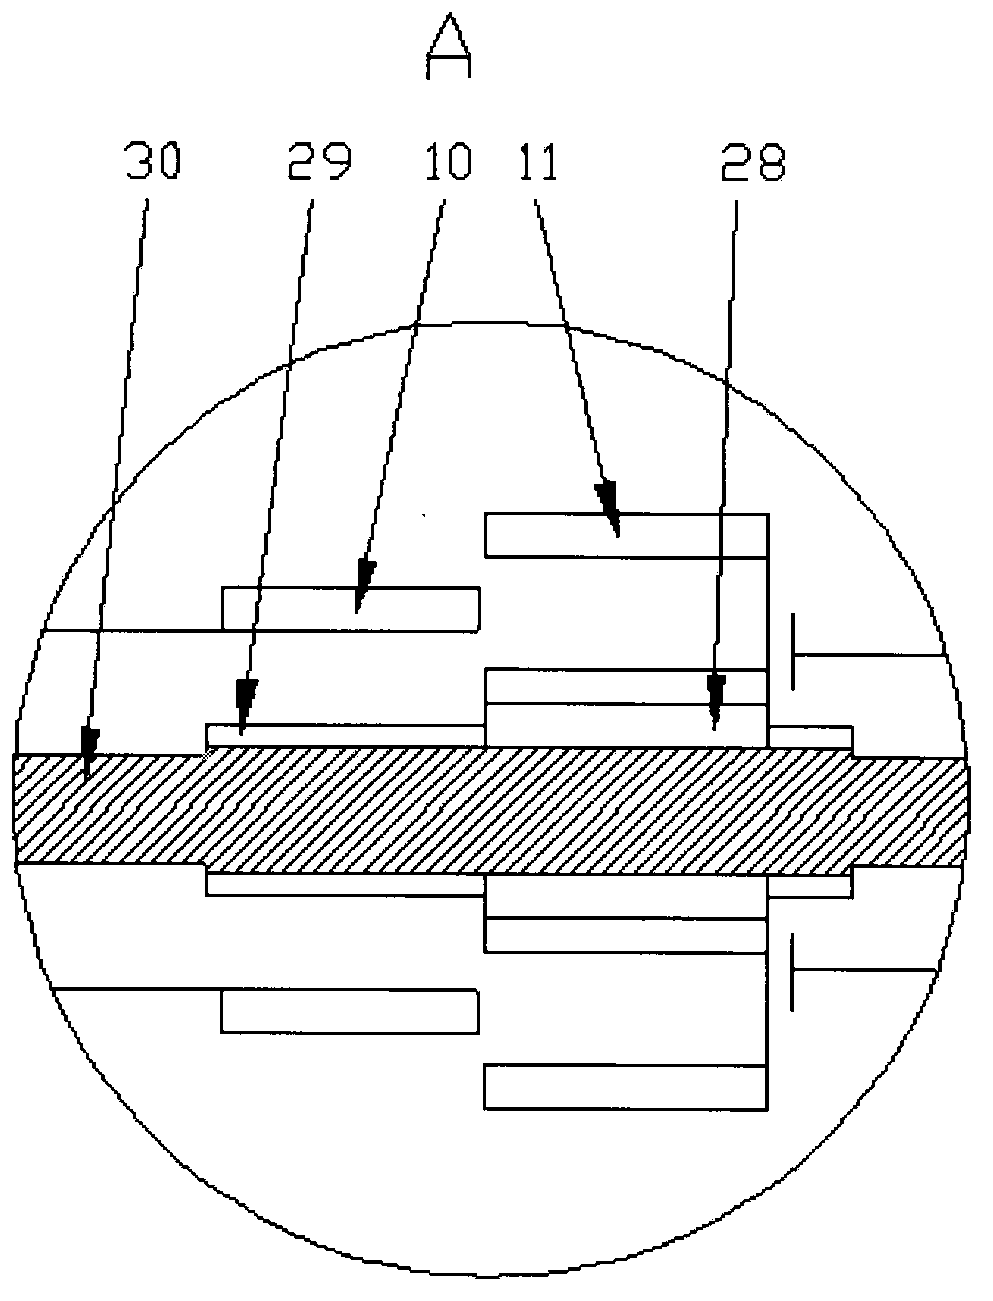 Continuously variable transmission system for flow distribution transmission of permanent magnetic speed-regulating planet gear